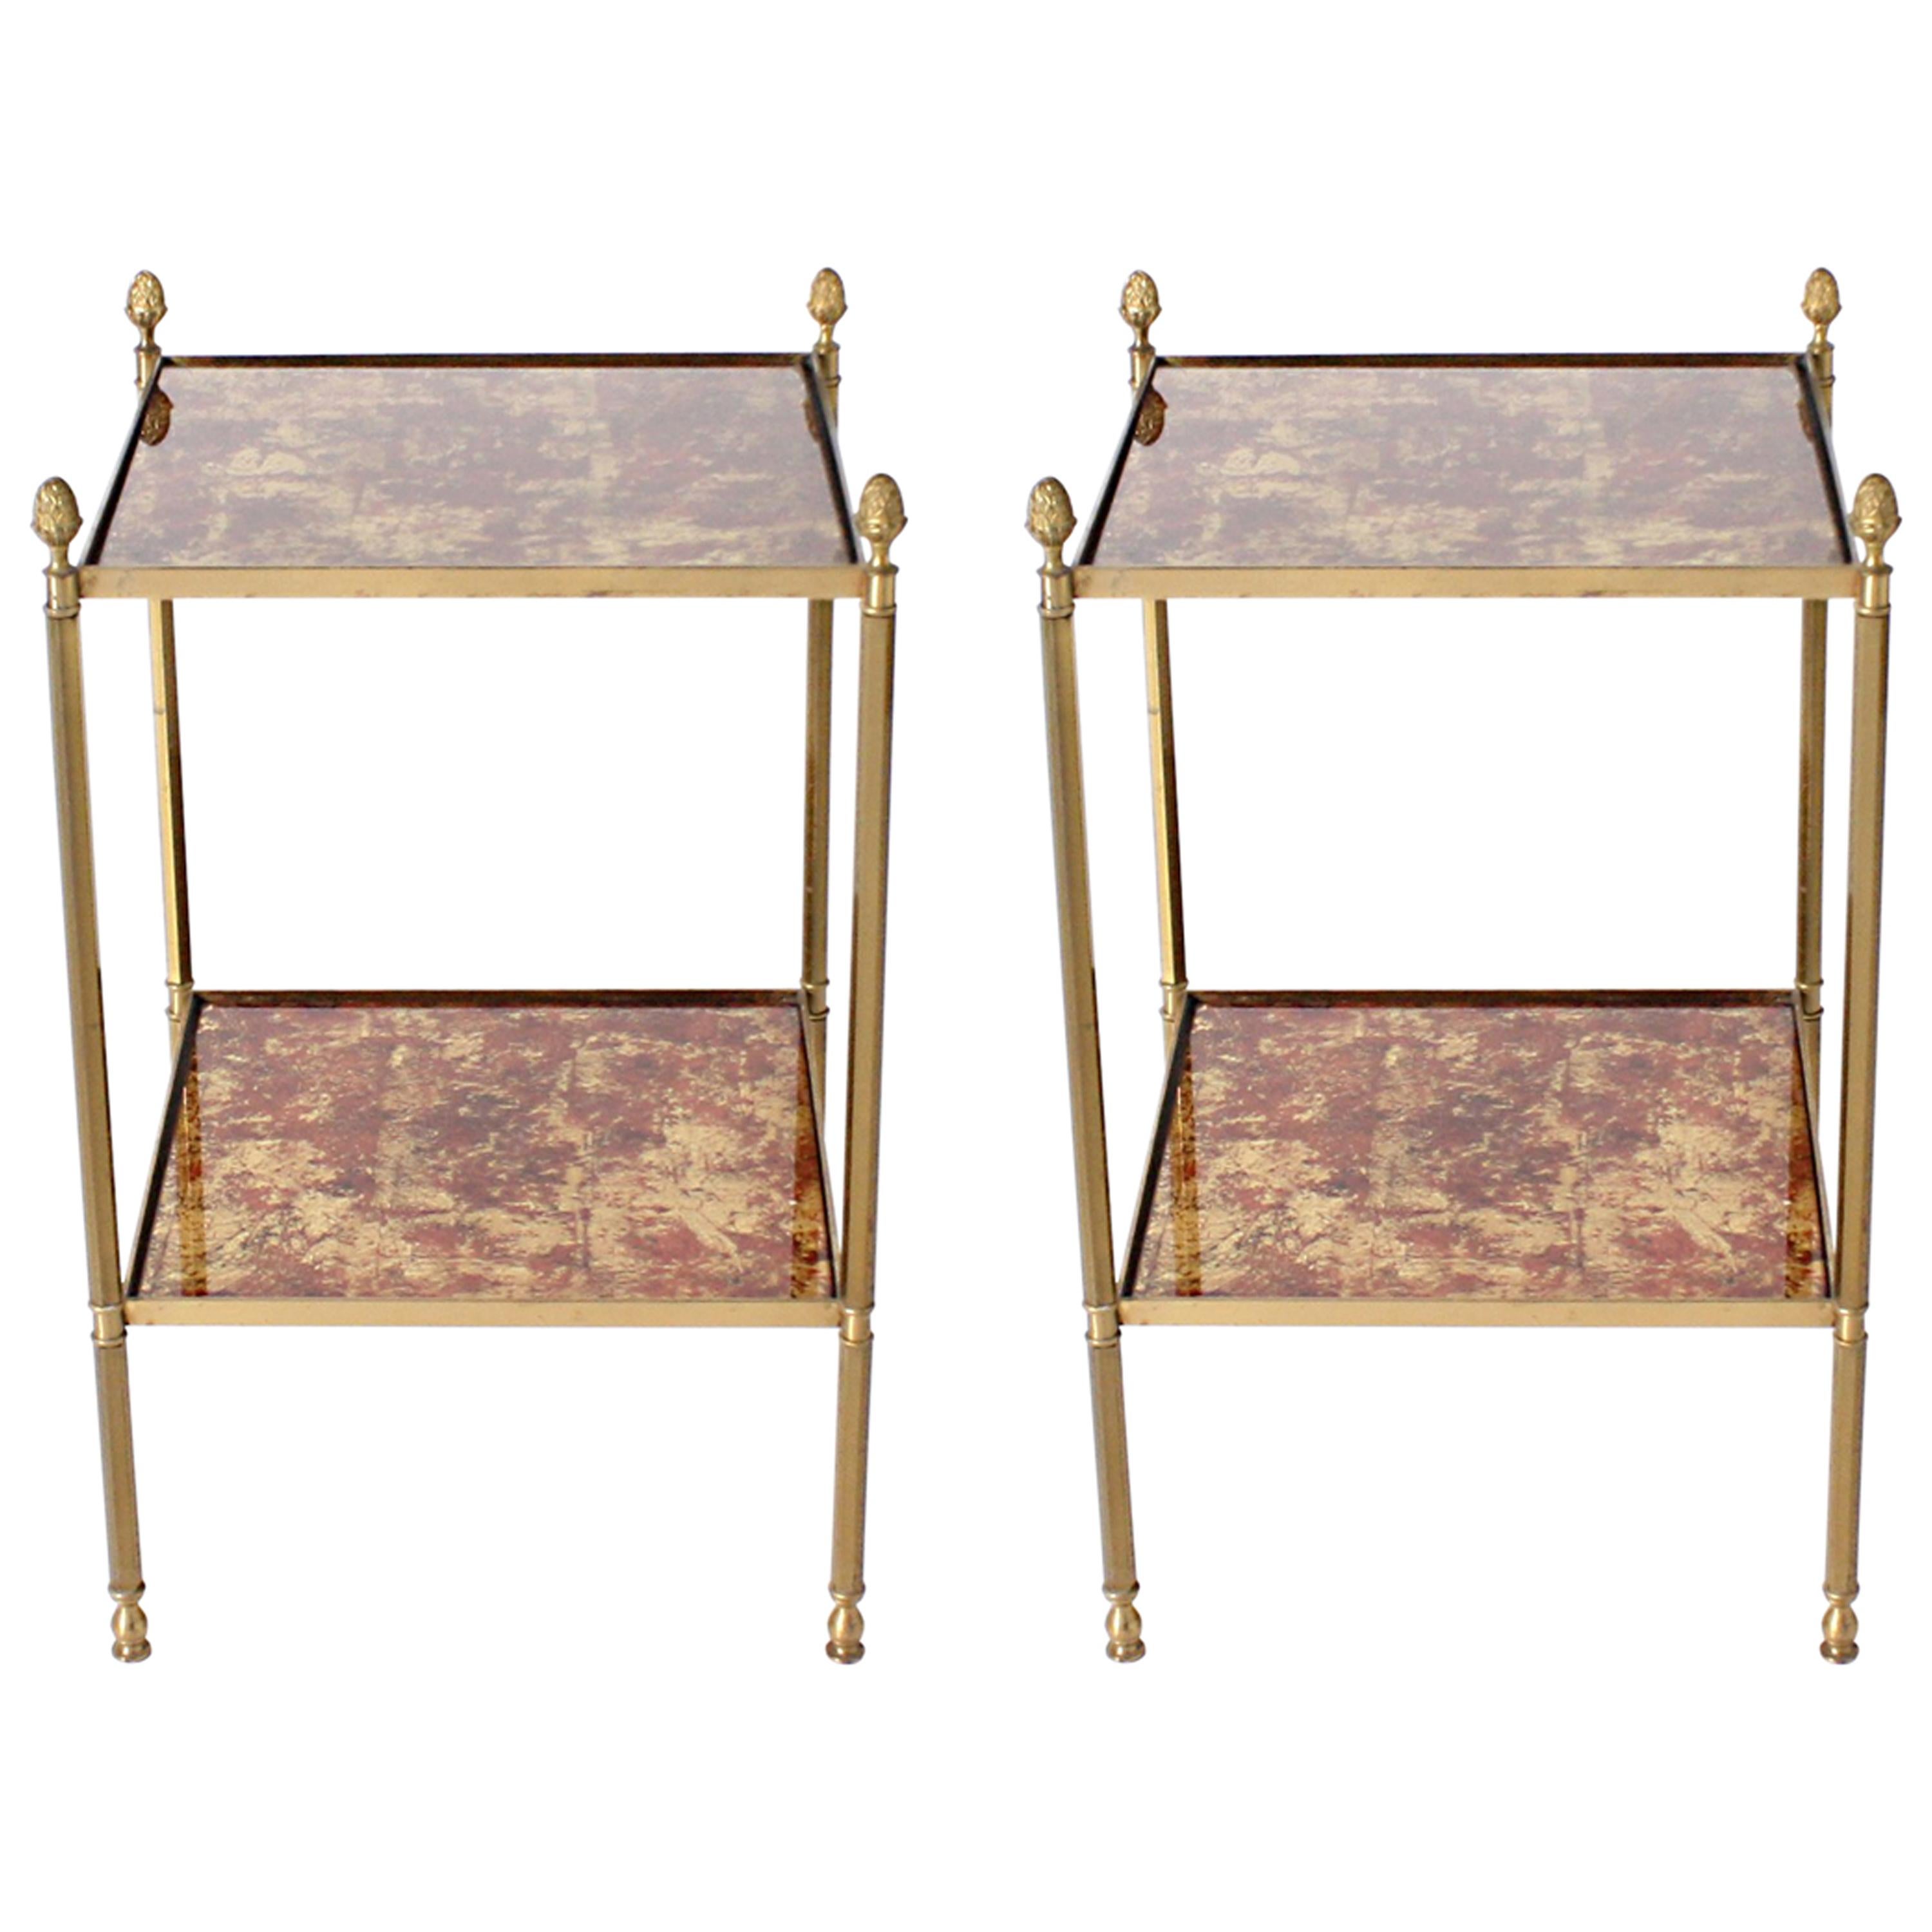 Pair of Brass Side Tables with Reverse Painted Glass Shelves, circa 1950